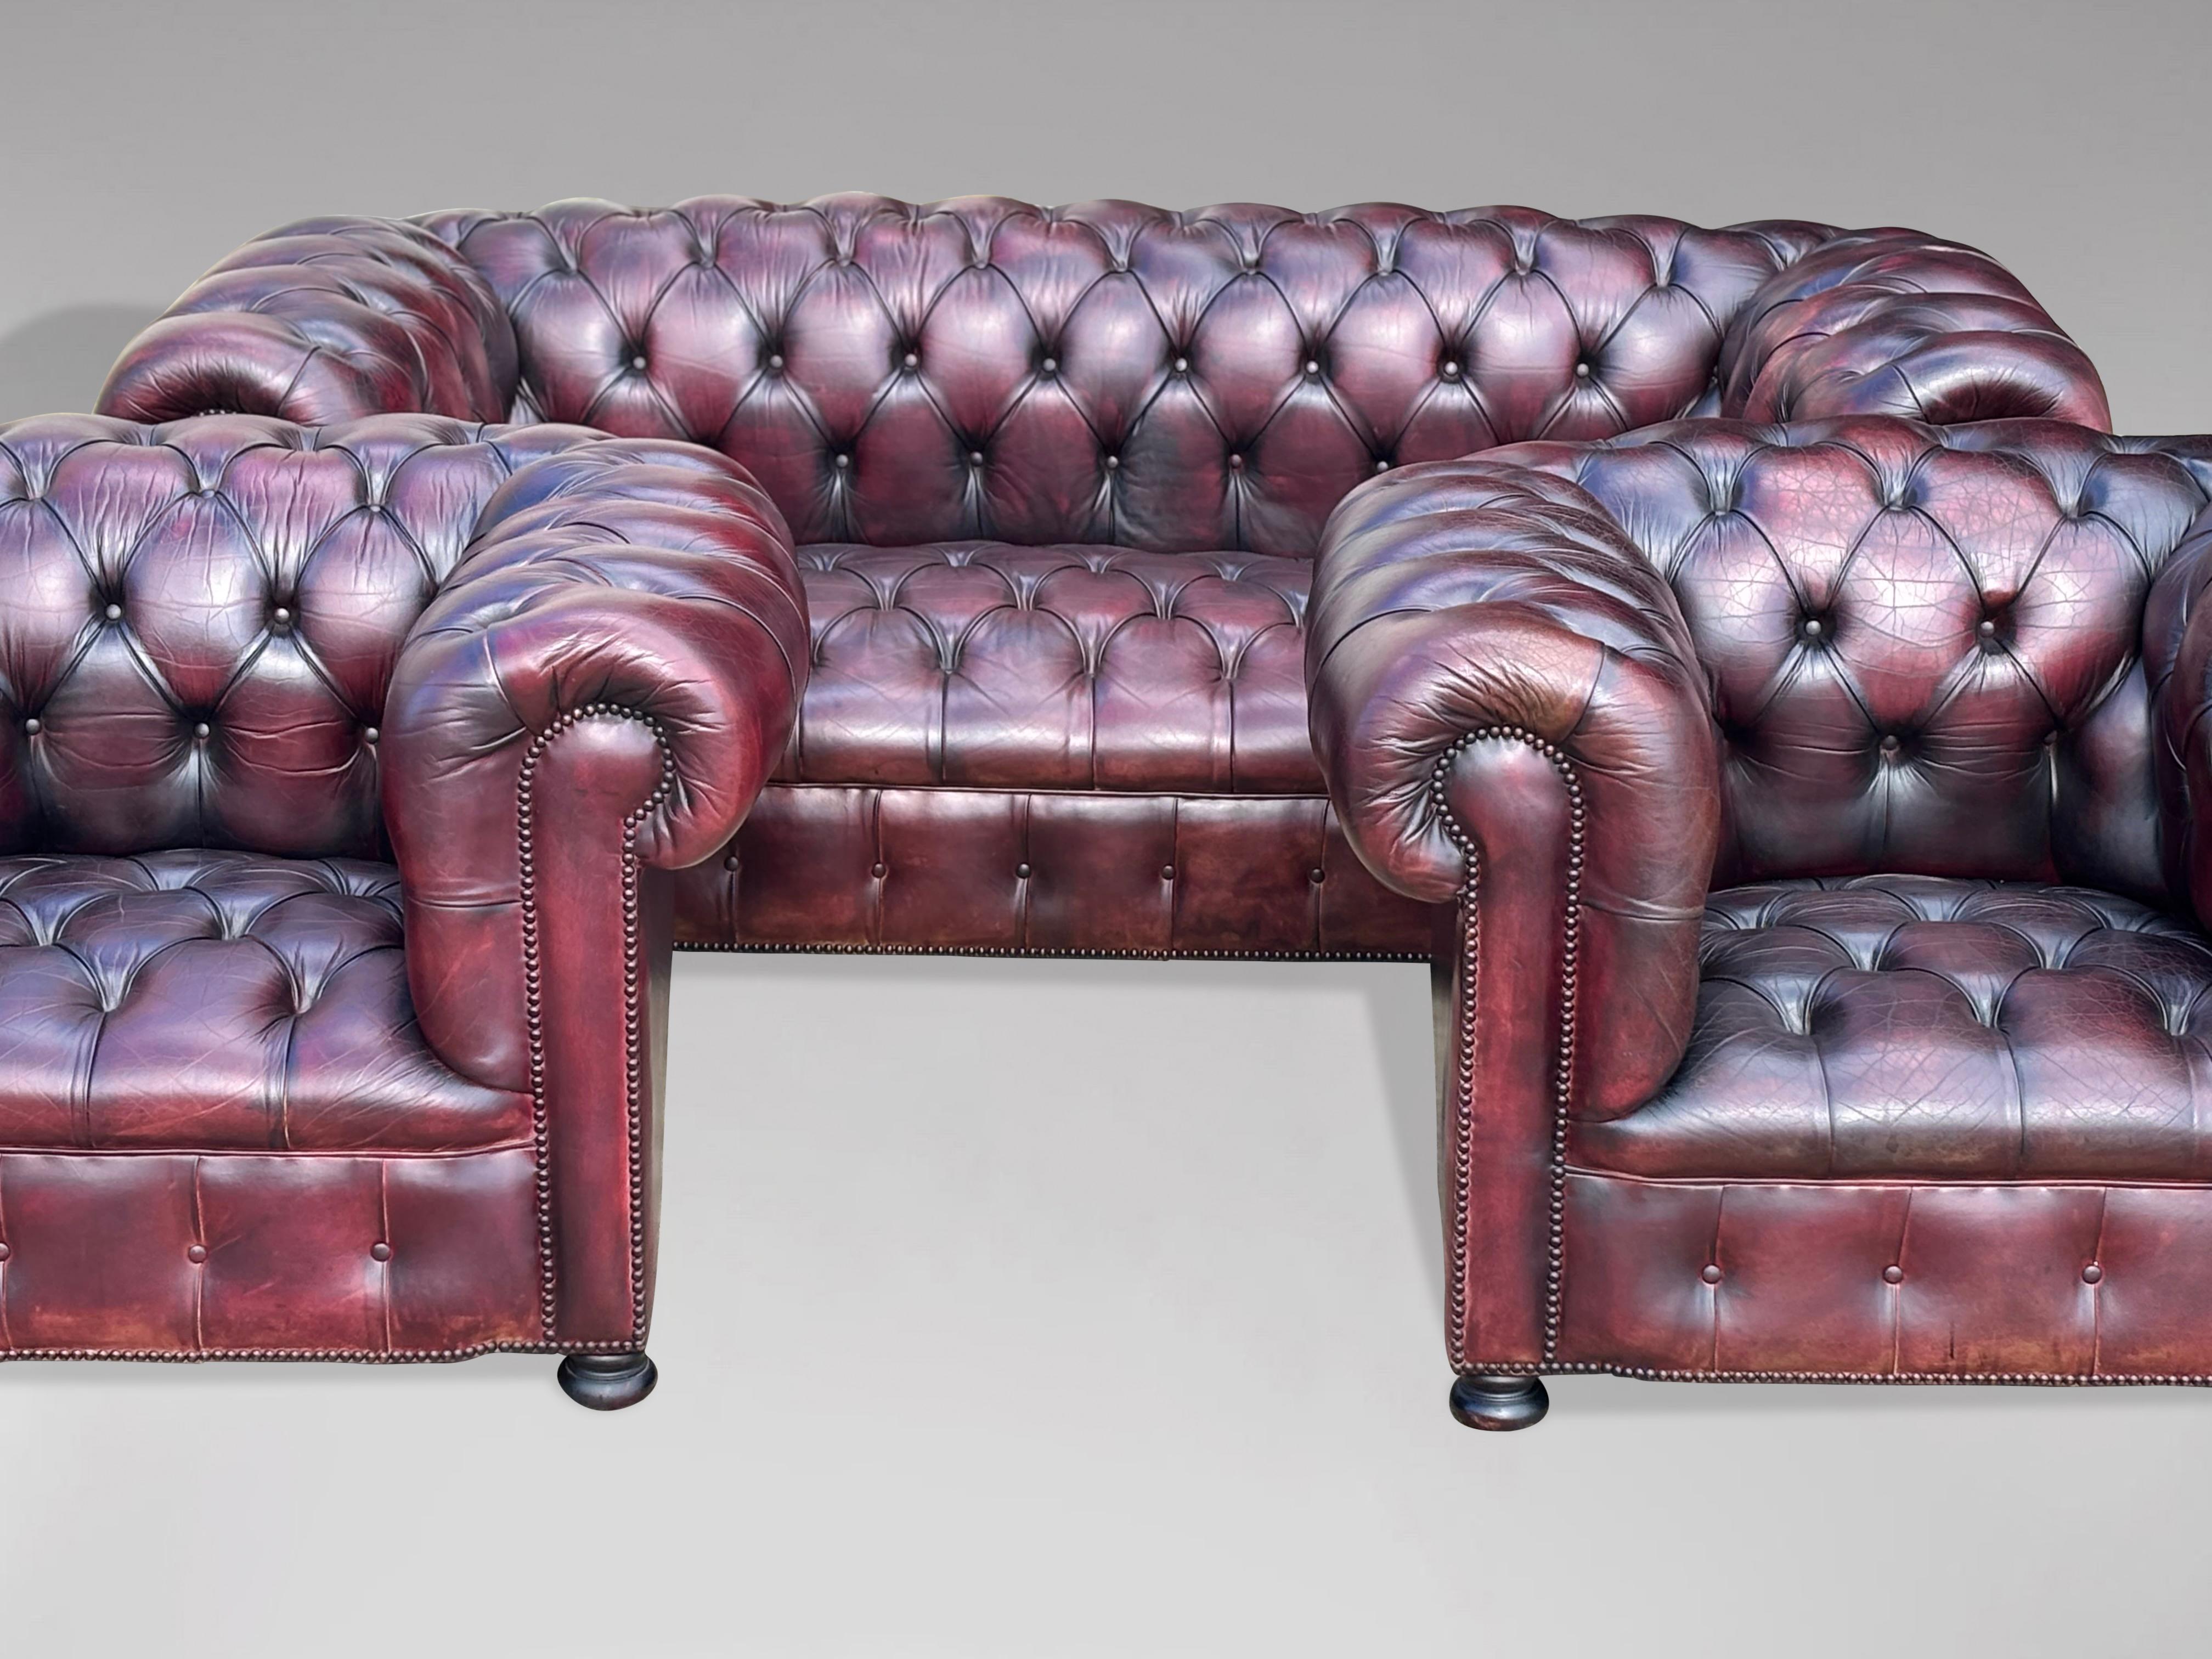 British Stunning Three Piece Burgundy Leather Chesterfield Suite For Sale